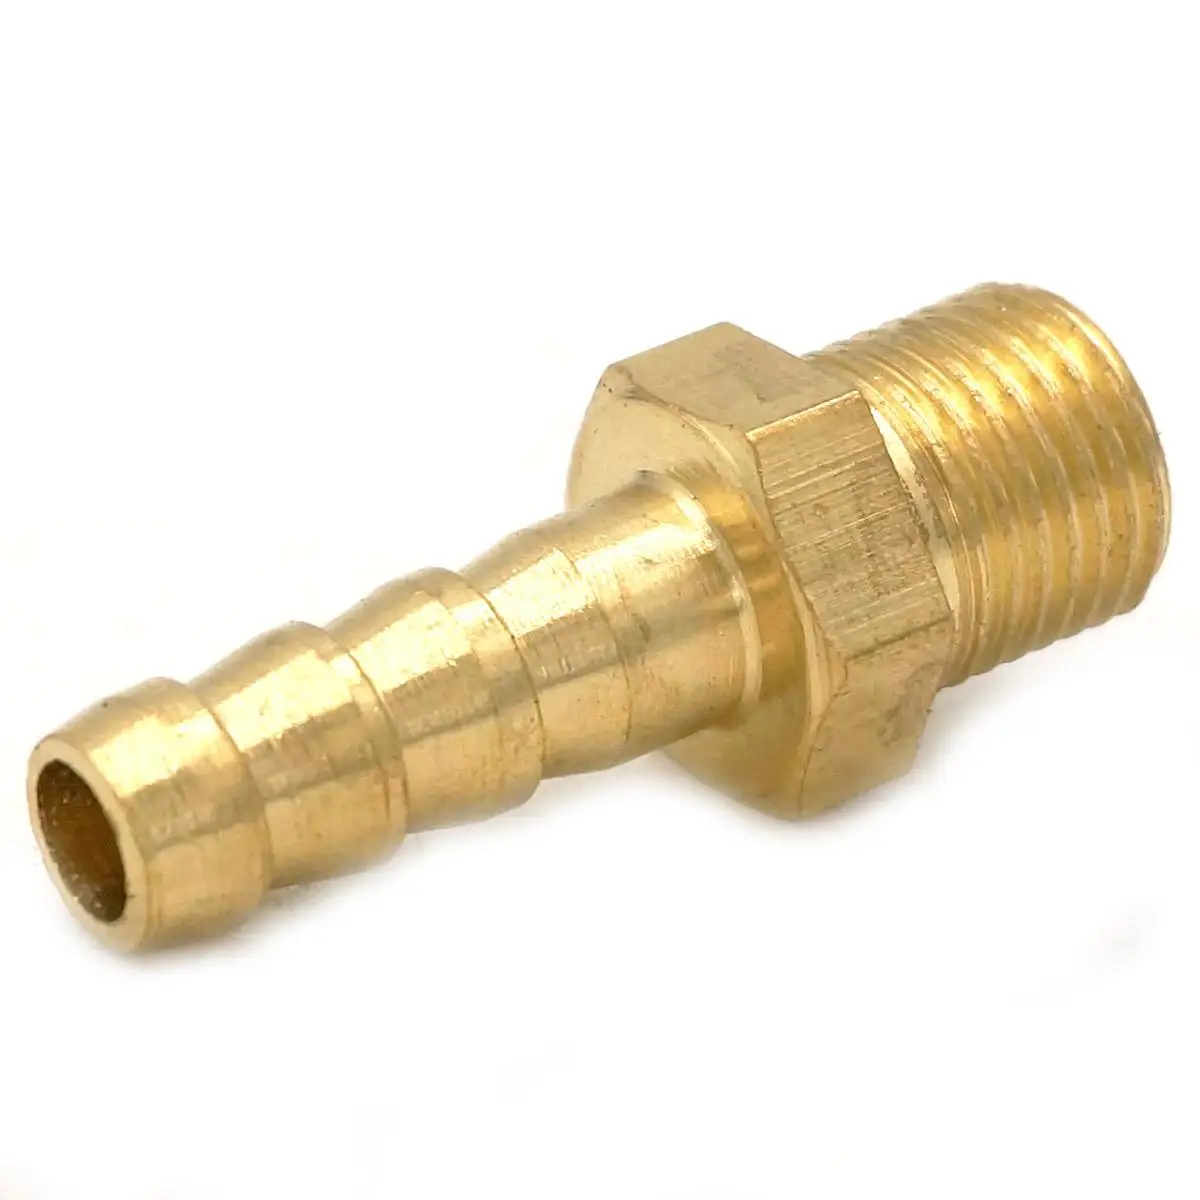 QUAROS LOT 2 Hose Barb I/D 6mm x 1/8 BSP Male Thread Elbow Brass coupler Splicer Connector fitting for Fuel Gas Water 